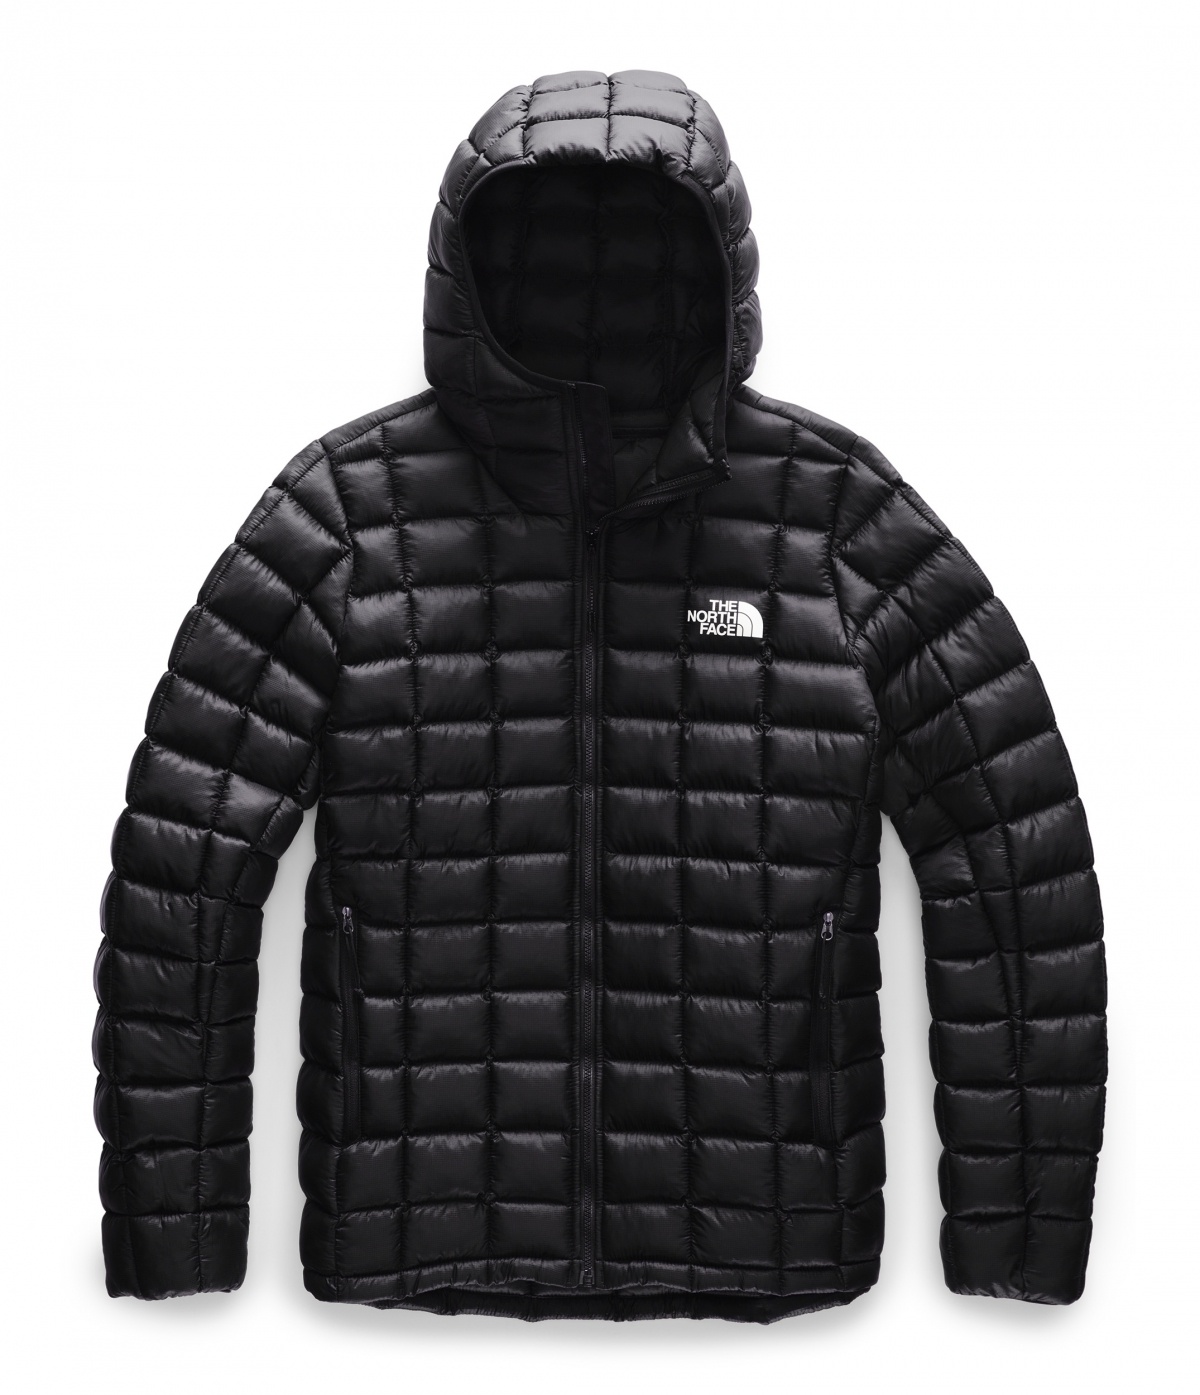 Shop The North Face Gear & Enter to Win a New Jacket – PSIA-AASI